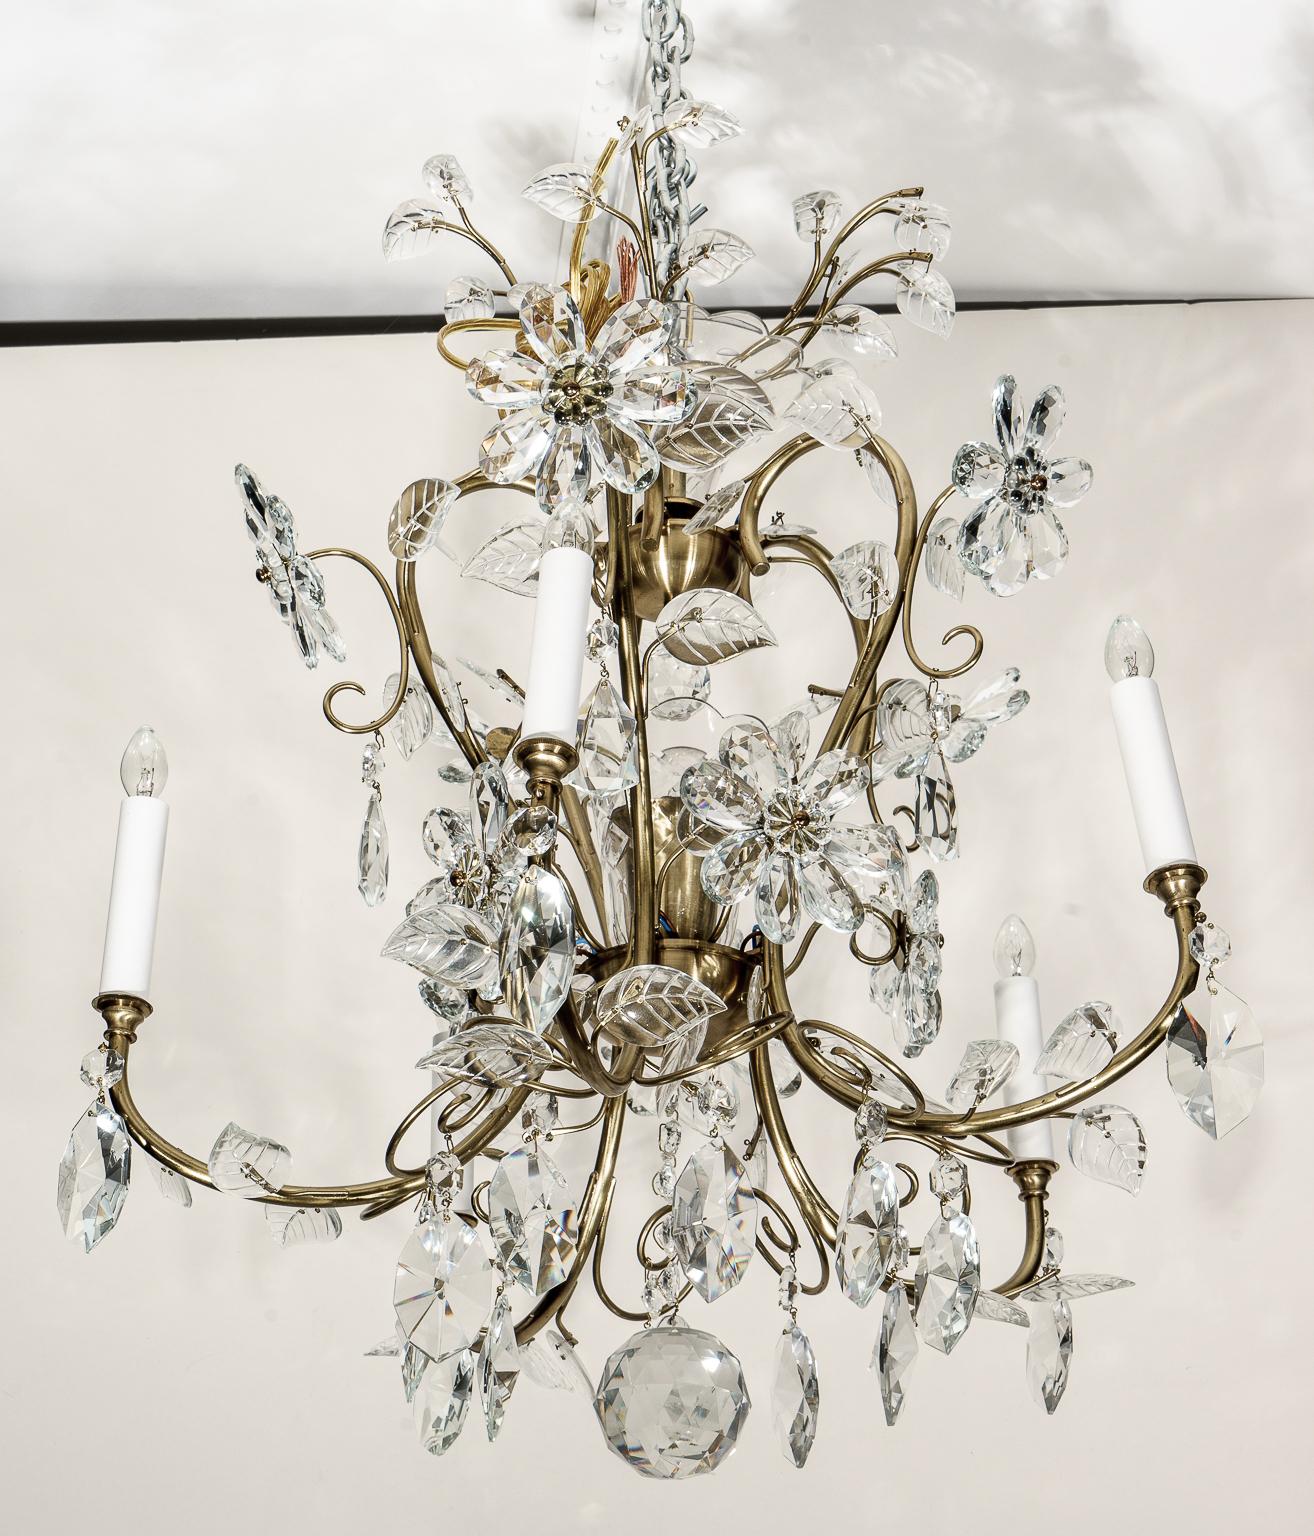 This stylish and romantic Louis XV style chandelier is detailed with stylized crystal flowers and foliage.

Note: Height not including the chain is 25.50